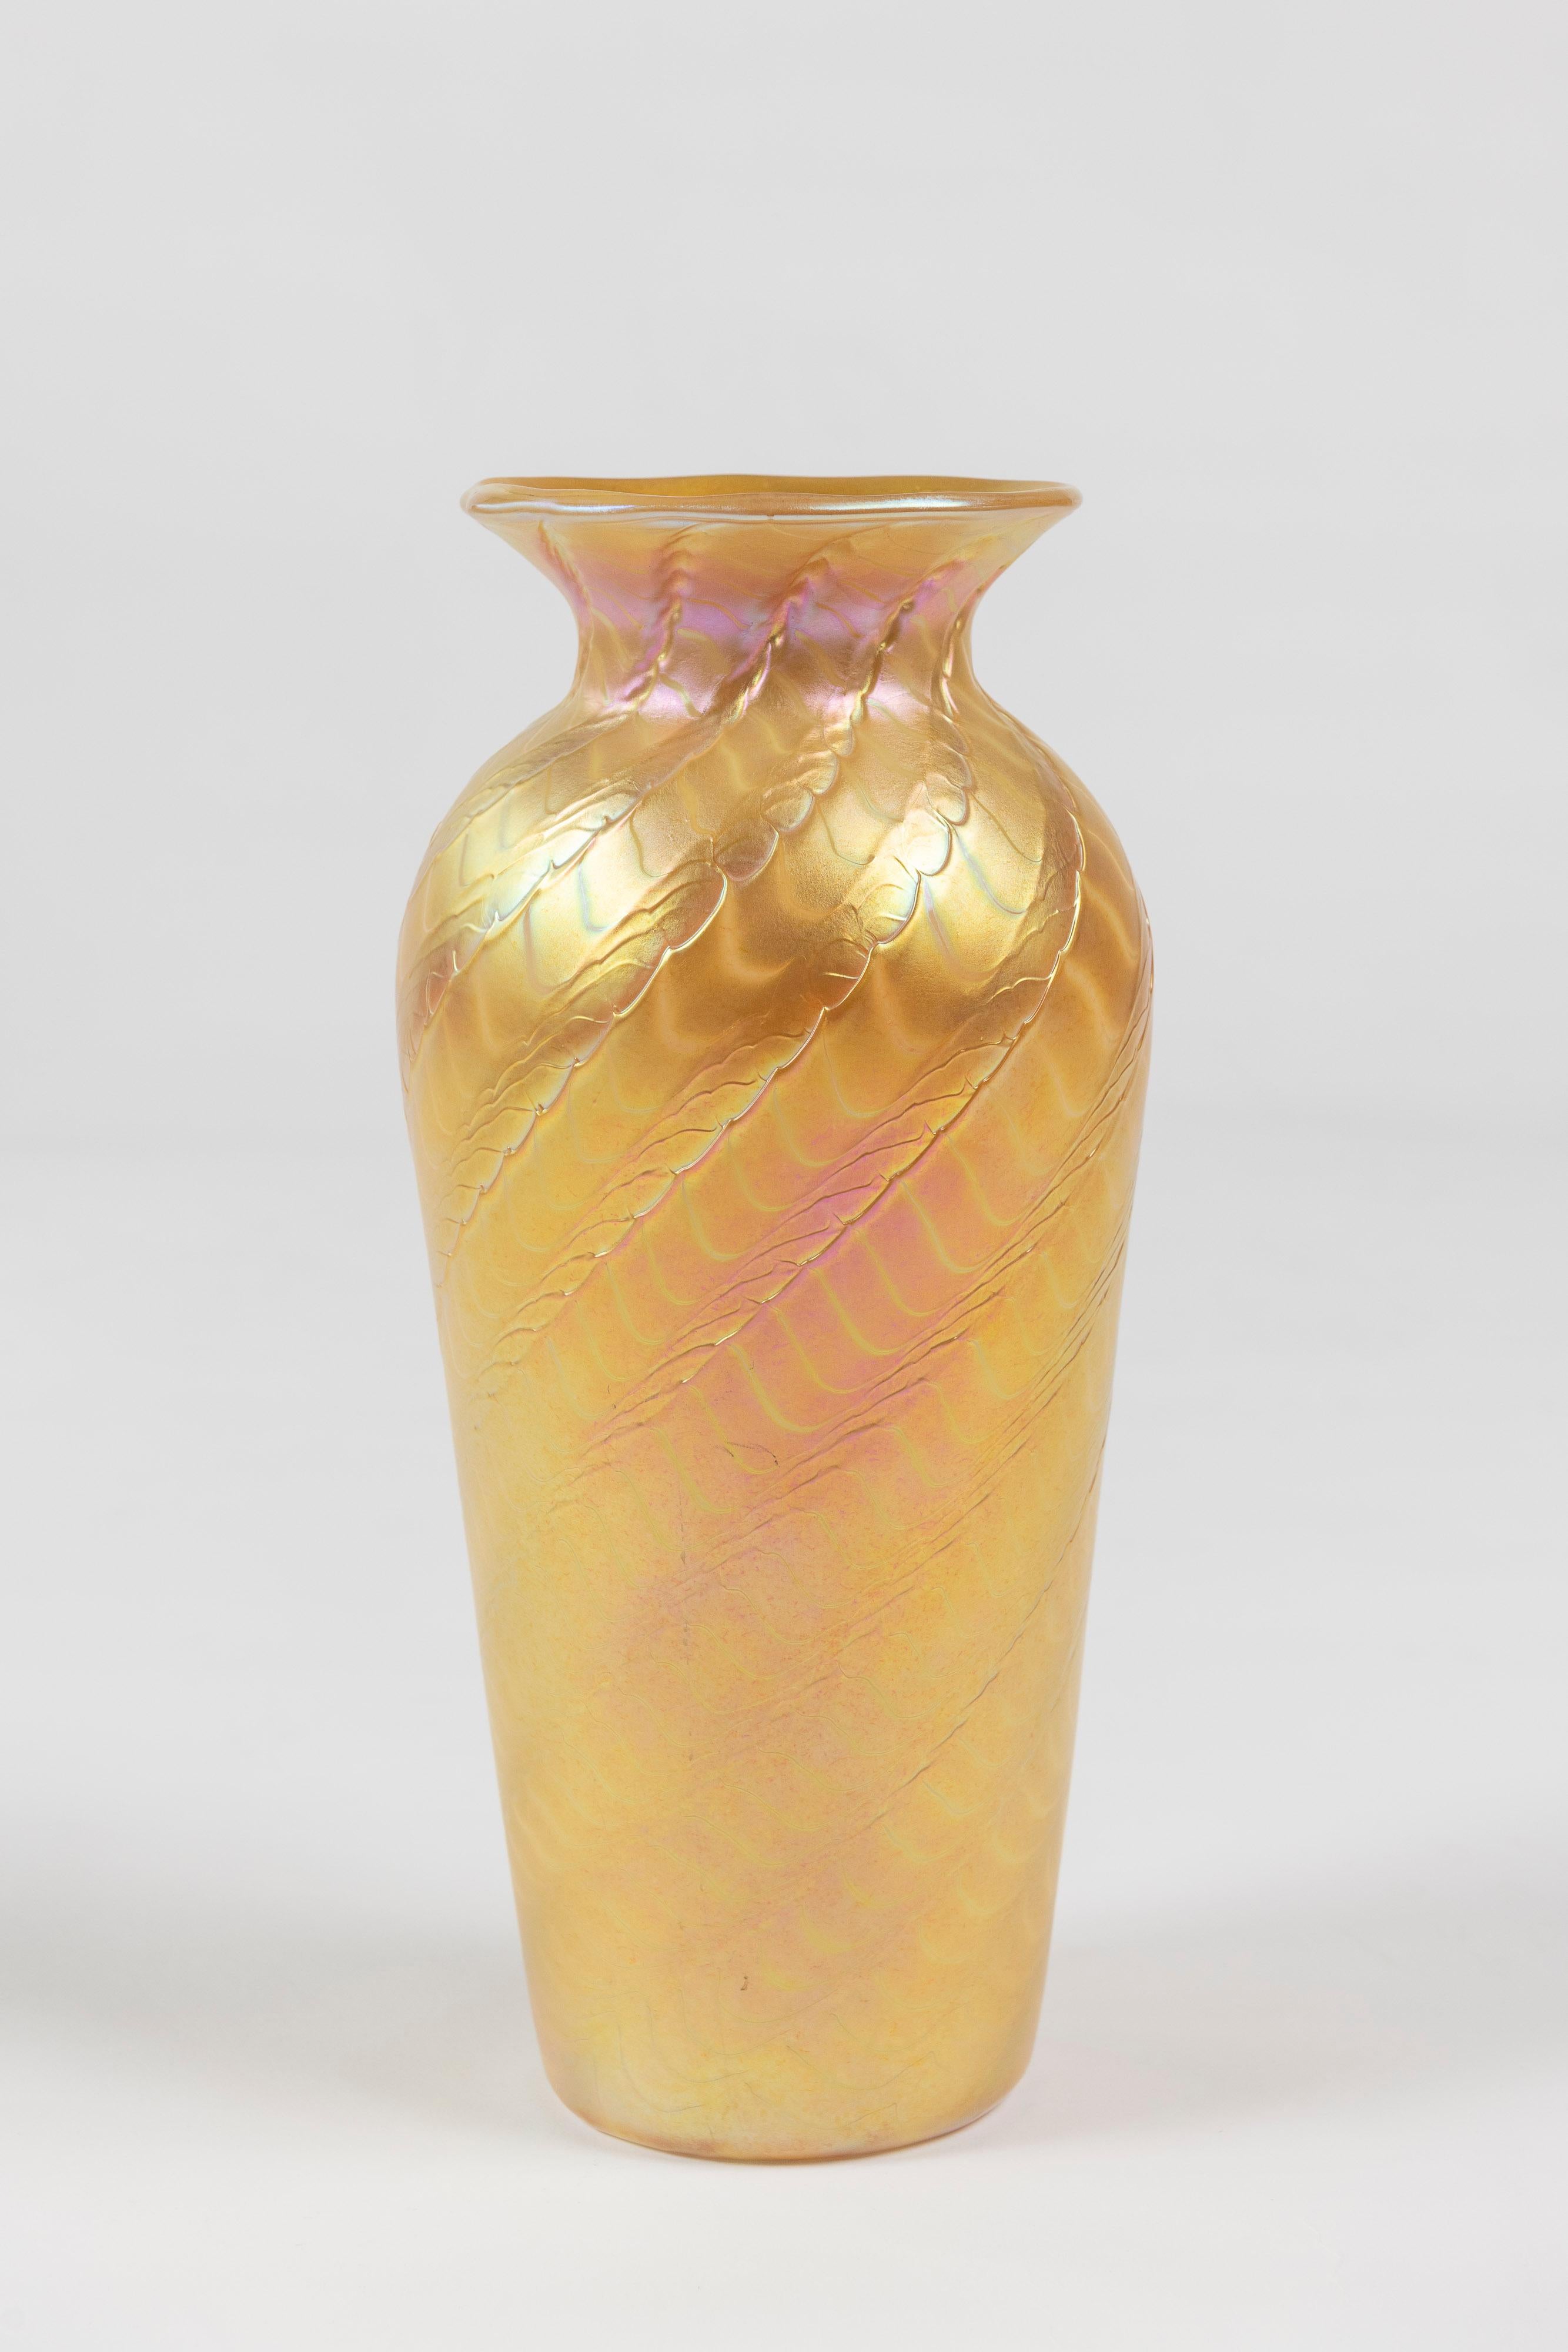 Striking tapered gold aurene art glass vase made by Lundberg Studios, California. Signed in 2000, this vase has a beautiful finish and is in good condition.